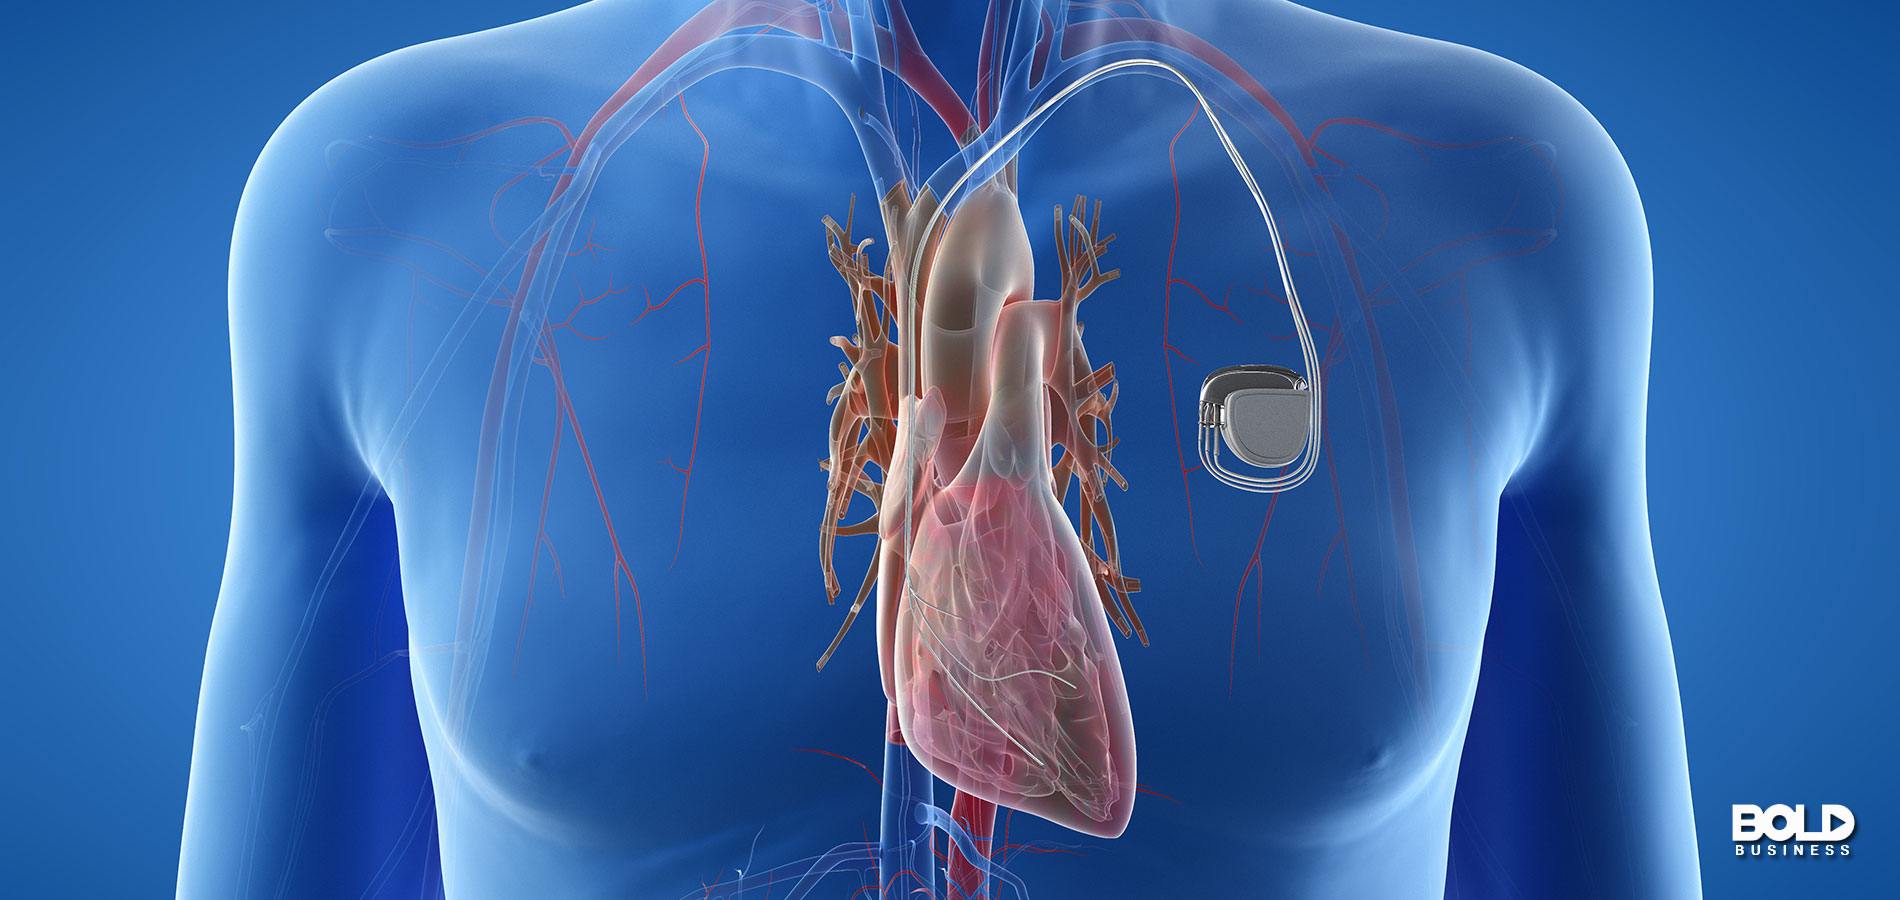 A blue person with a pacemaker